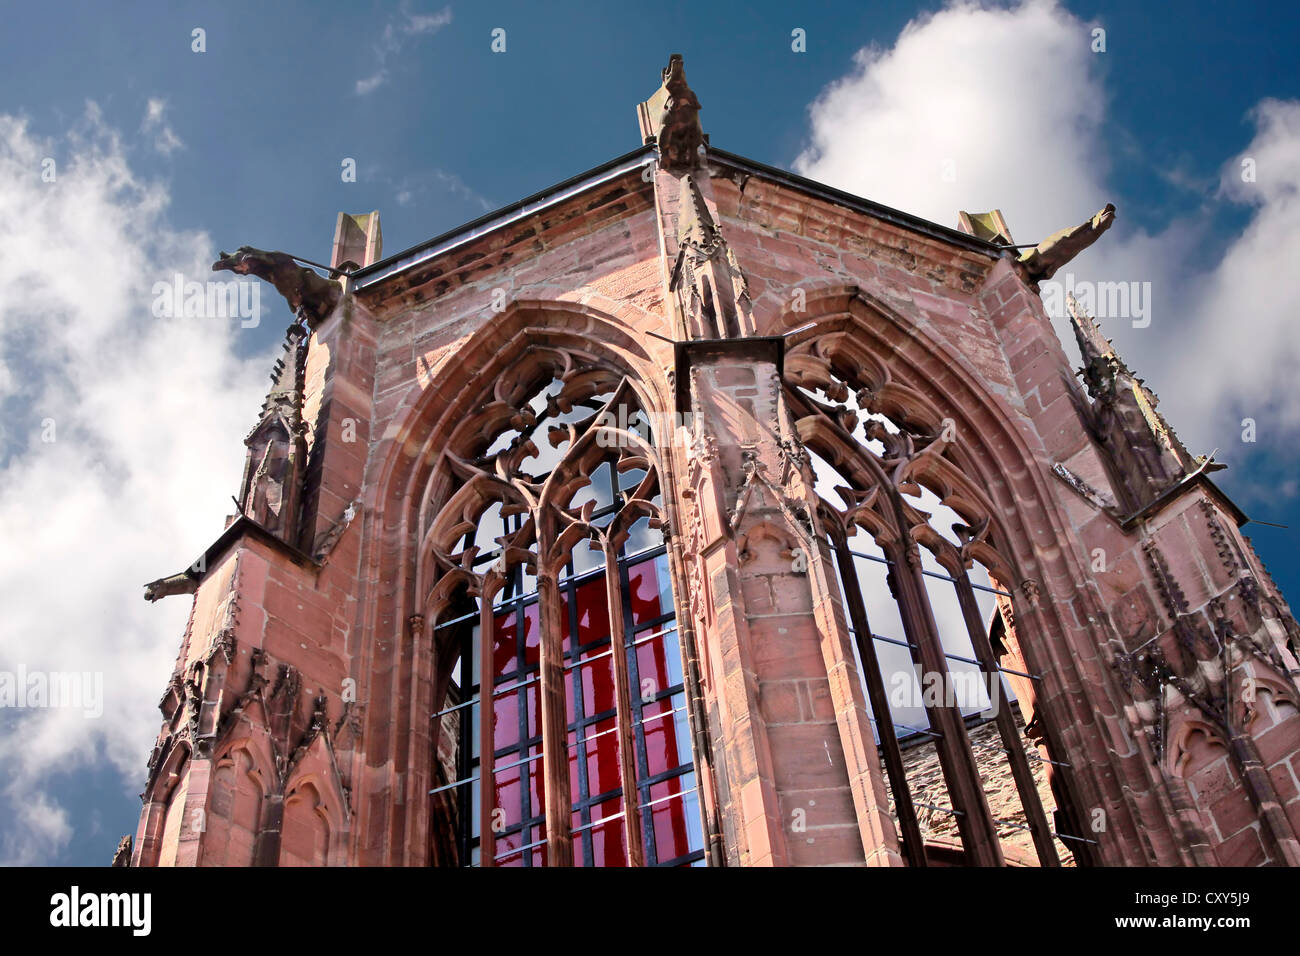 Ruin of Werner chapel in Bacharach in the Middle Rhine Valley, Rhineland-Palatinate, Germany Stock Photo